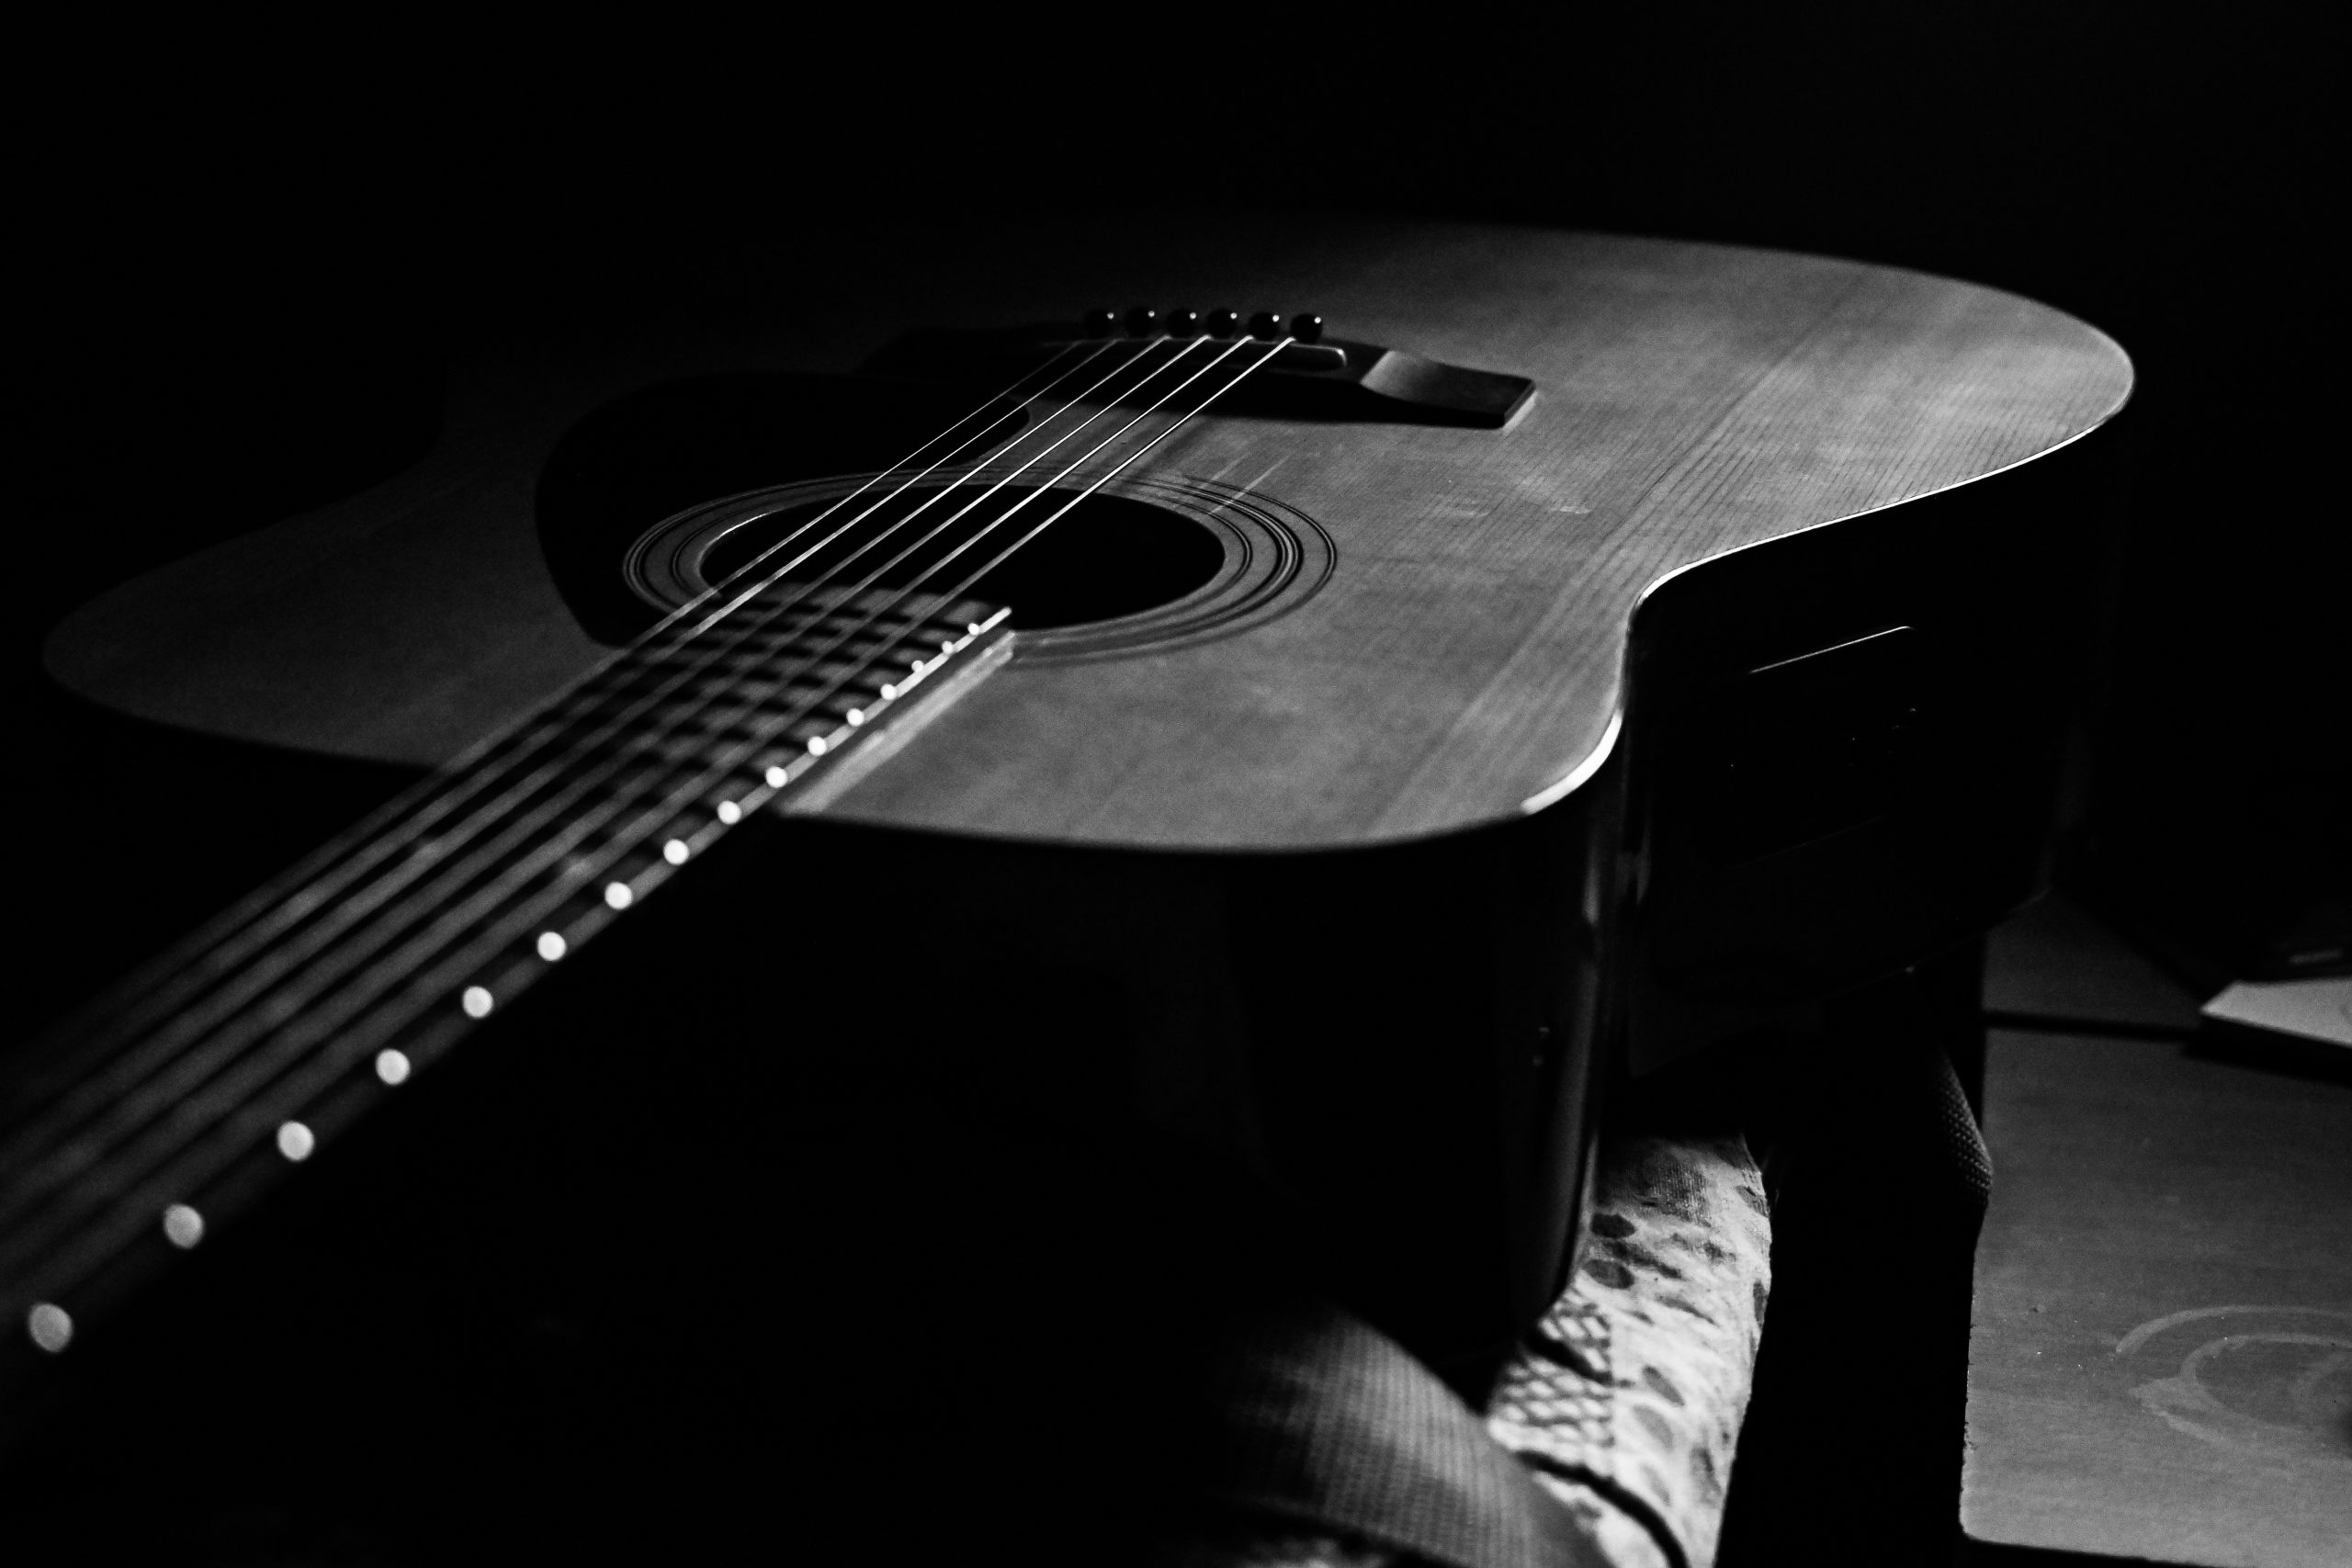 Acoustic Guitar on Black and White